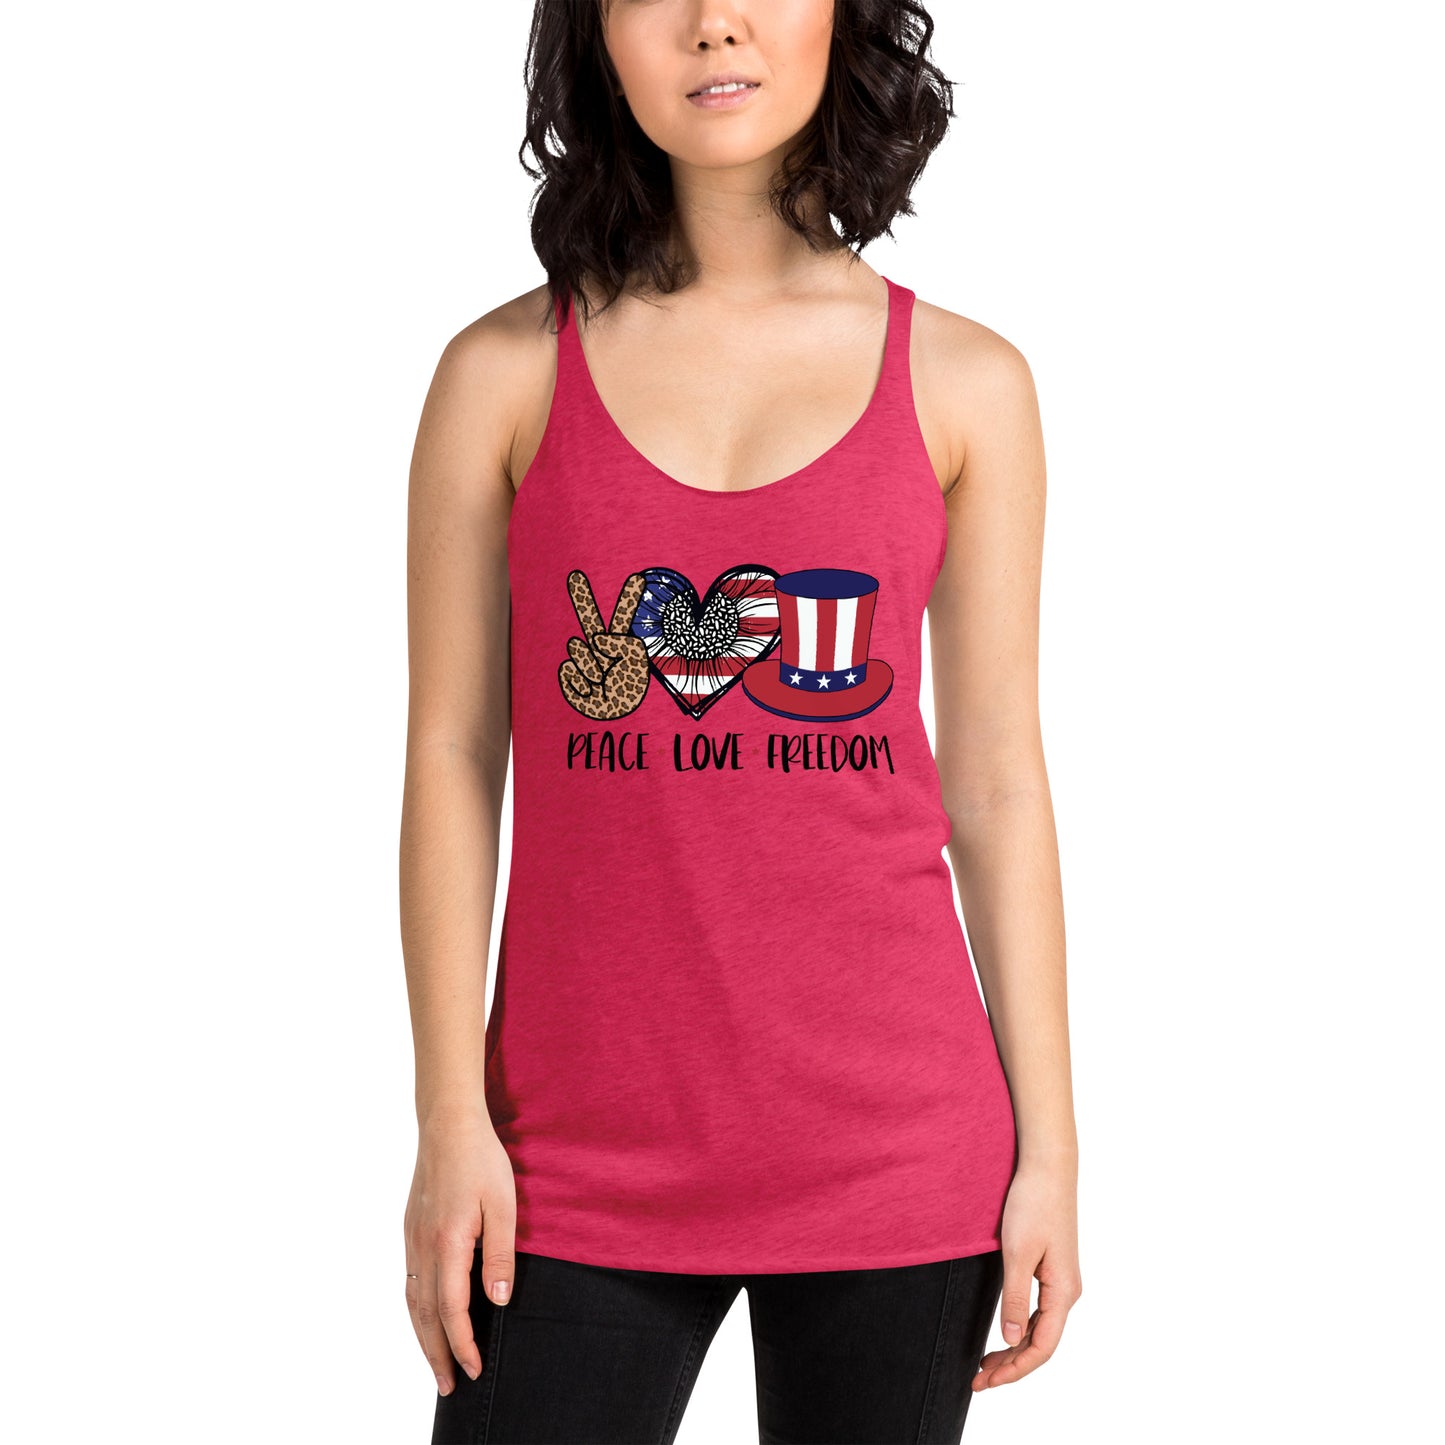 Peace Love and Freedom Women's Racerback Tank